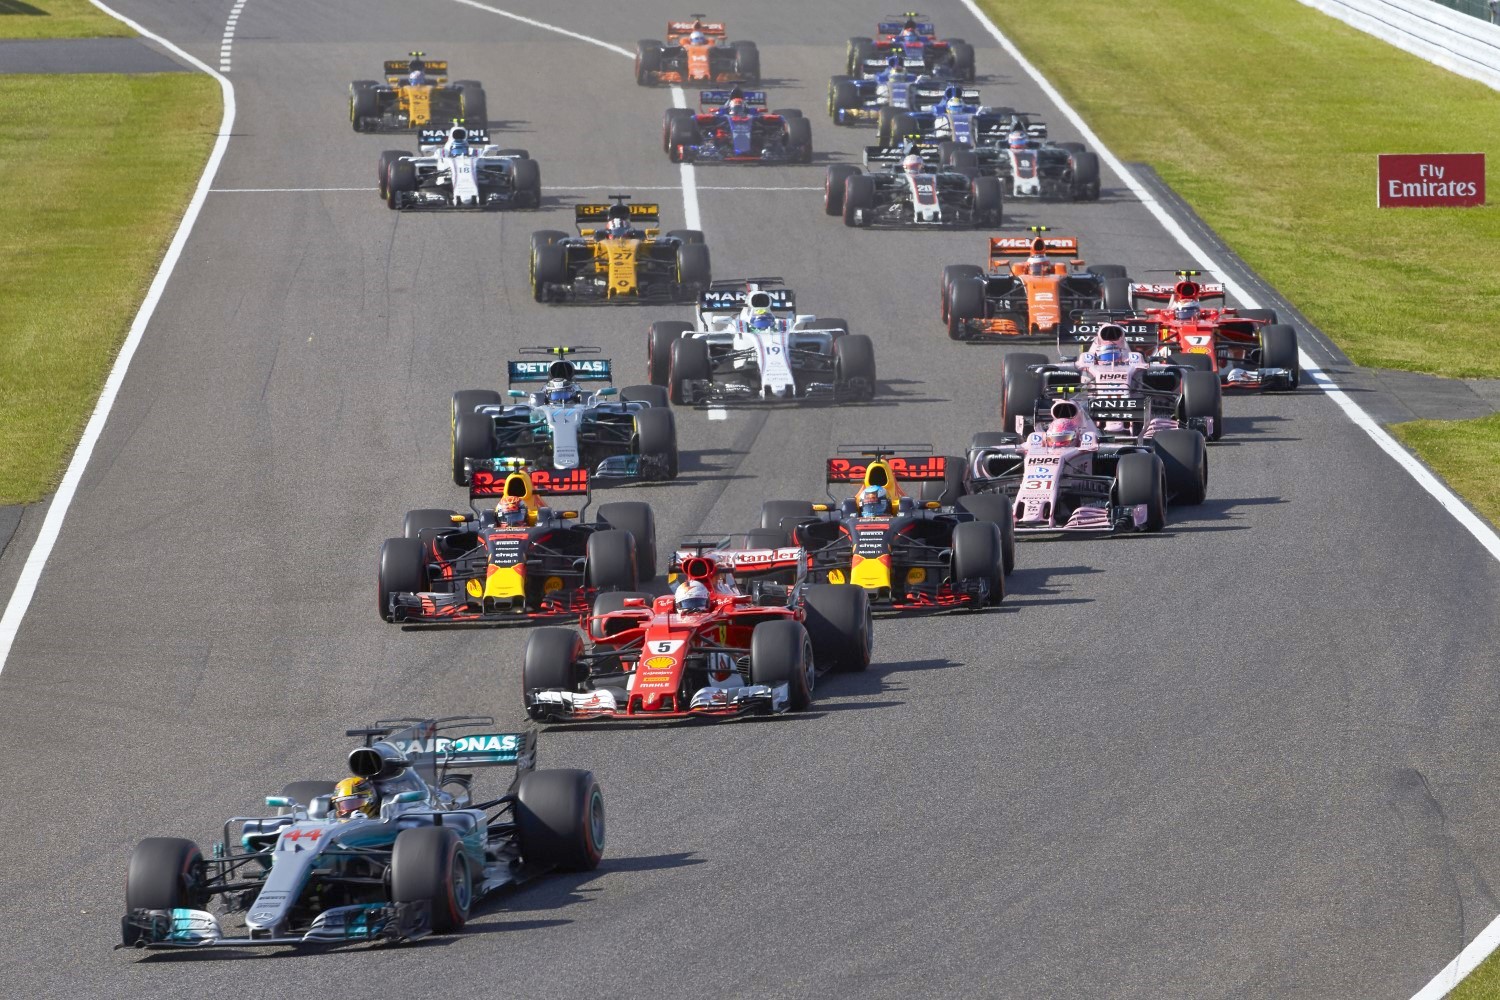 Hamilton leads at the start